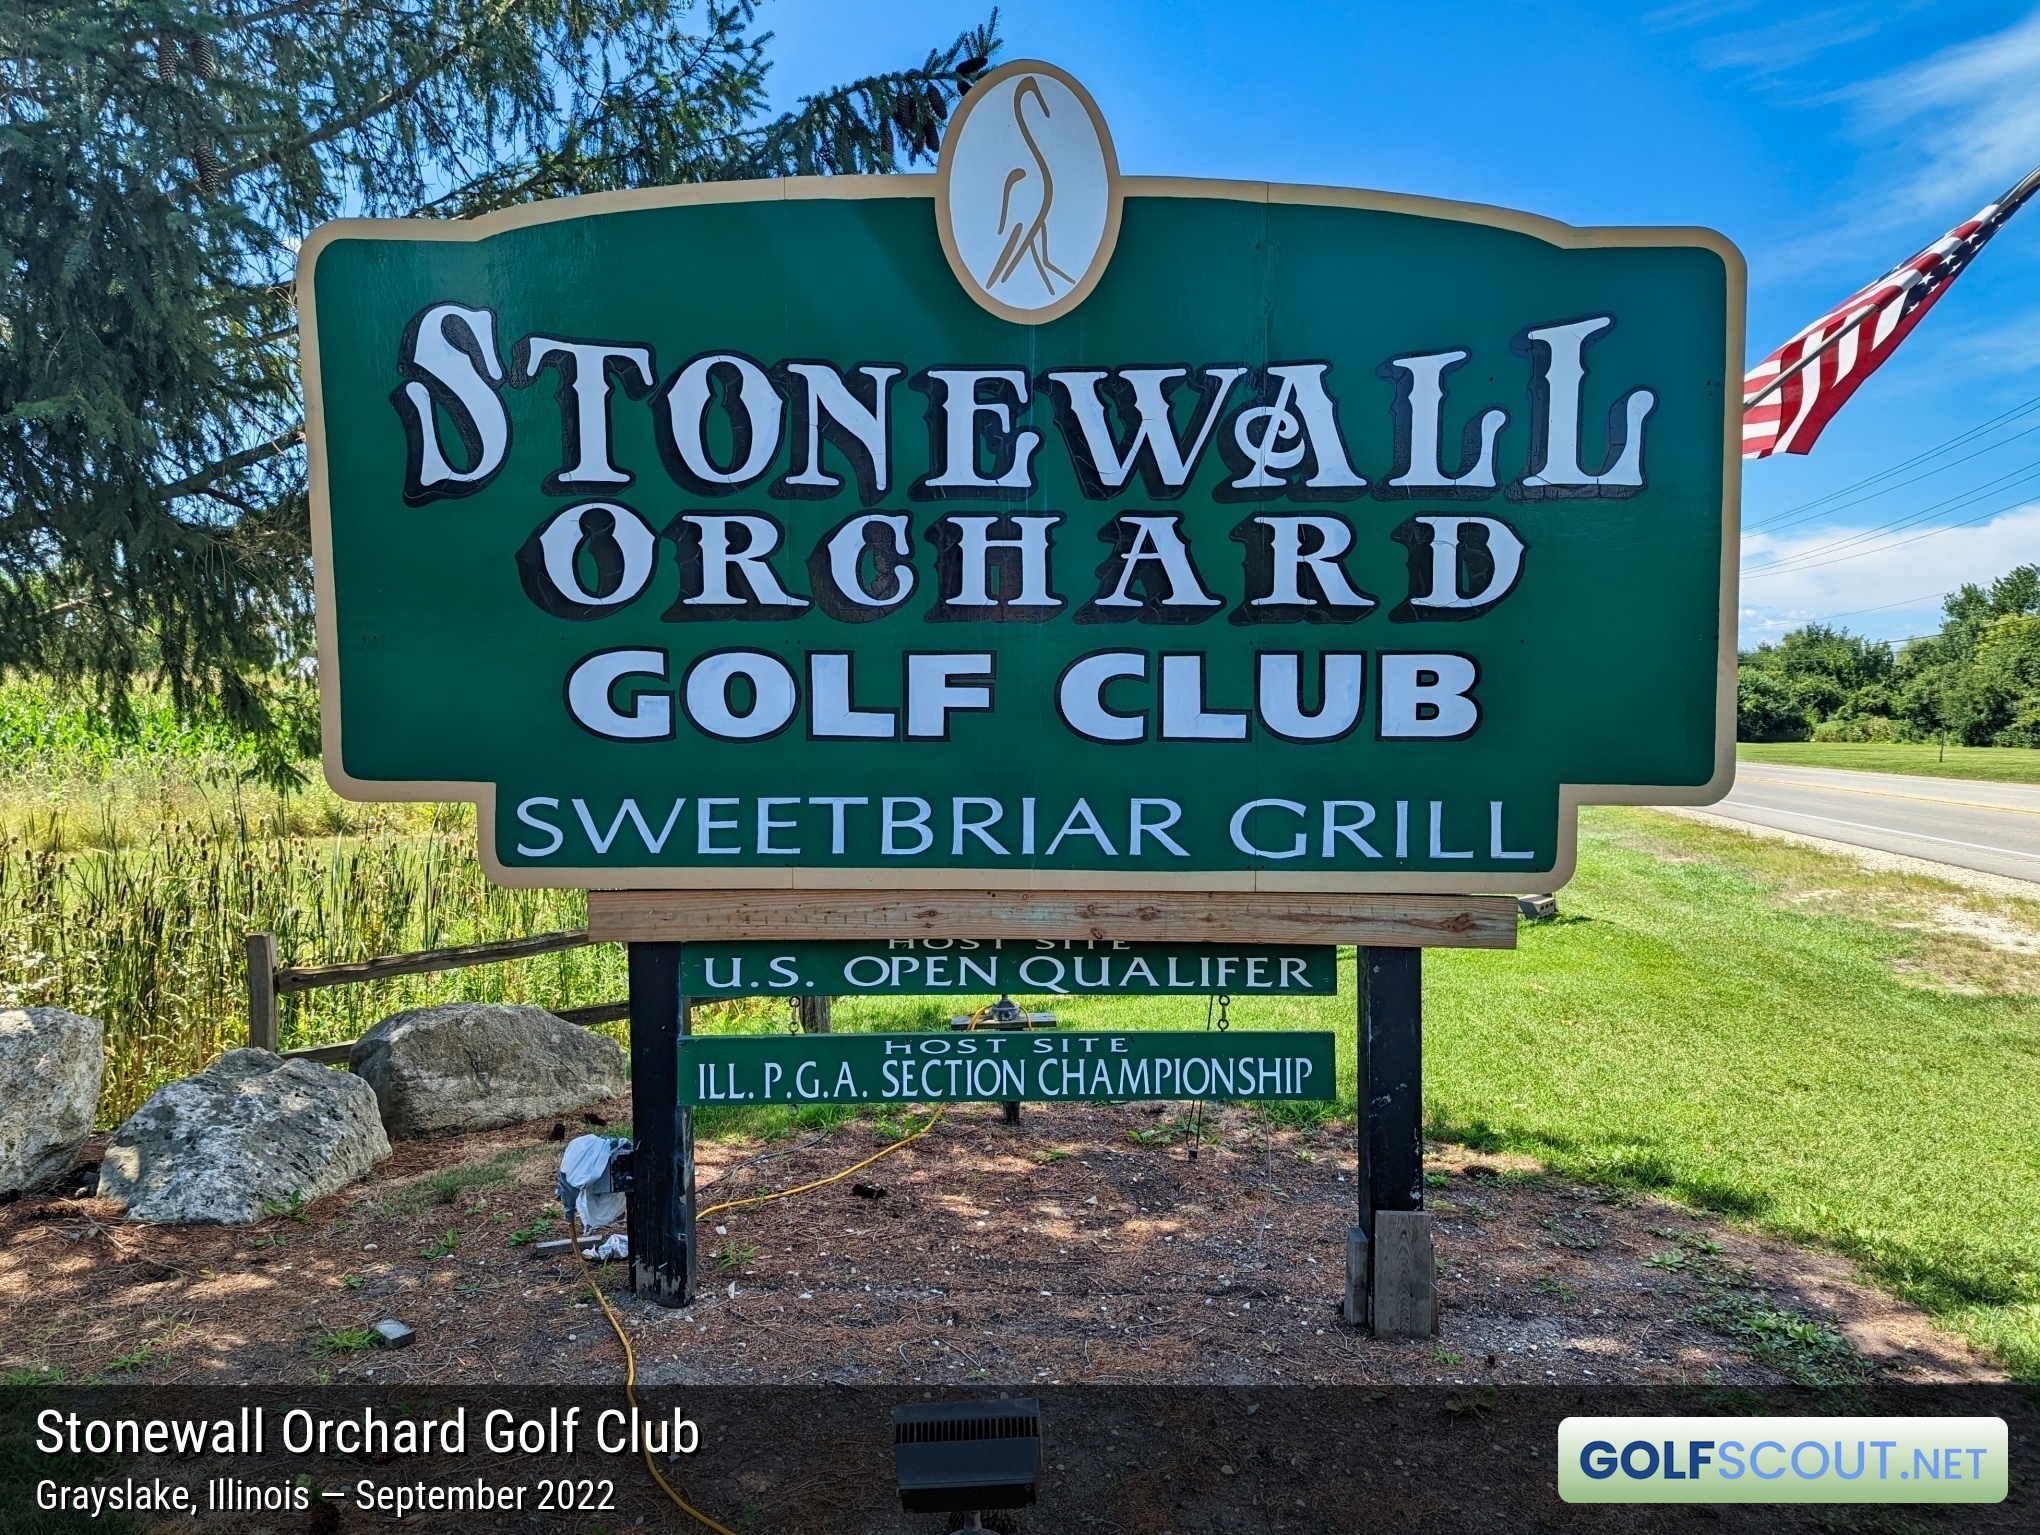 Sign at the entrance to Stonewall Orchard Golf Club